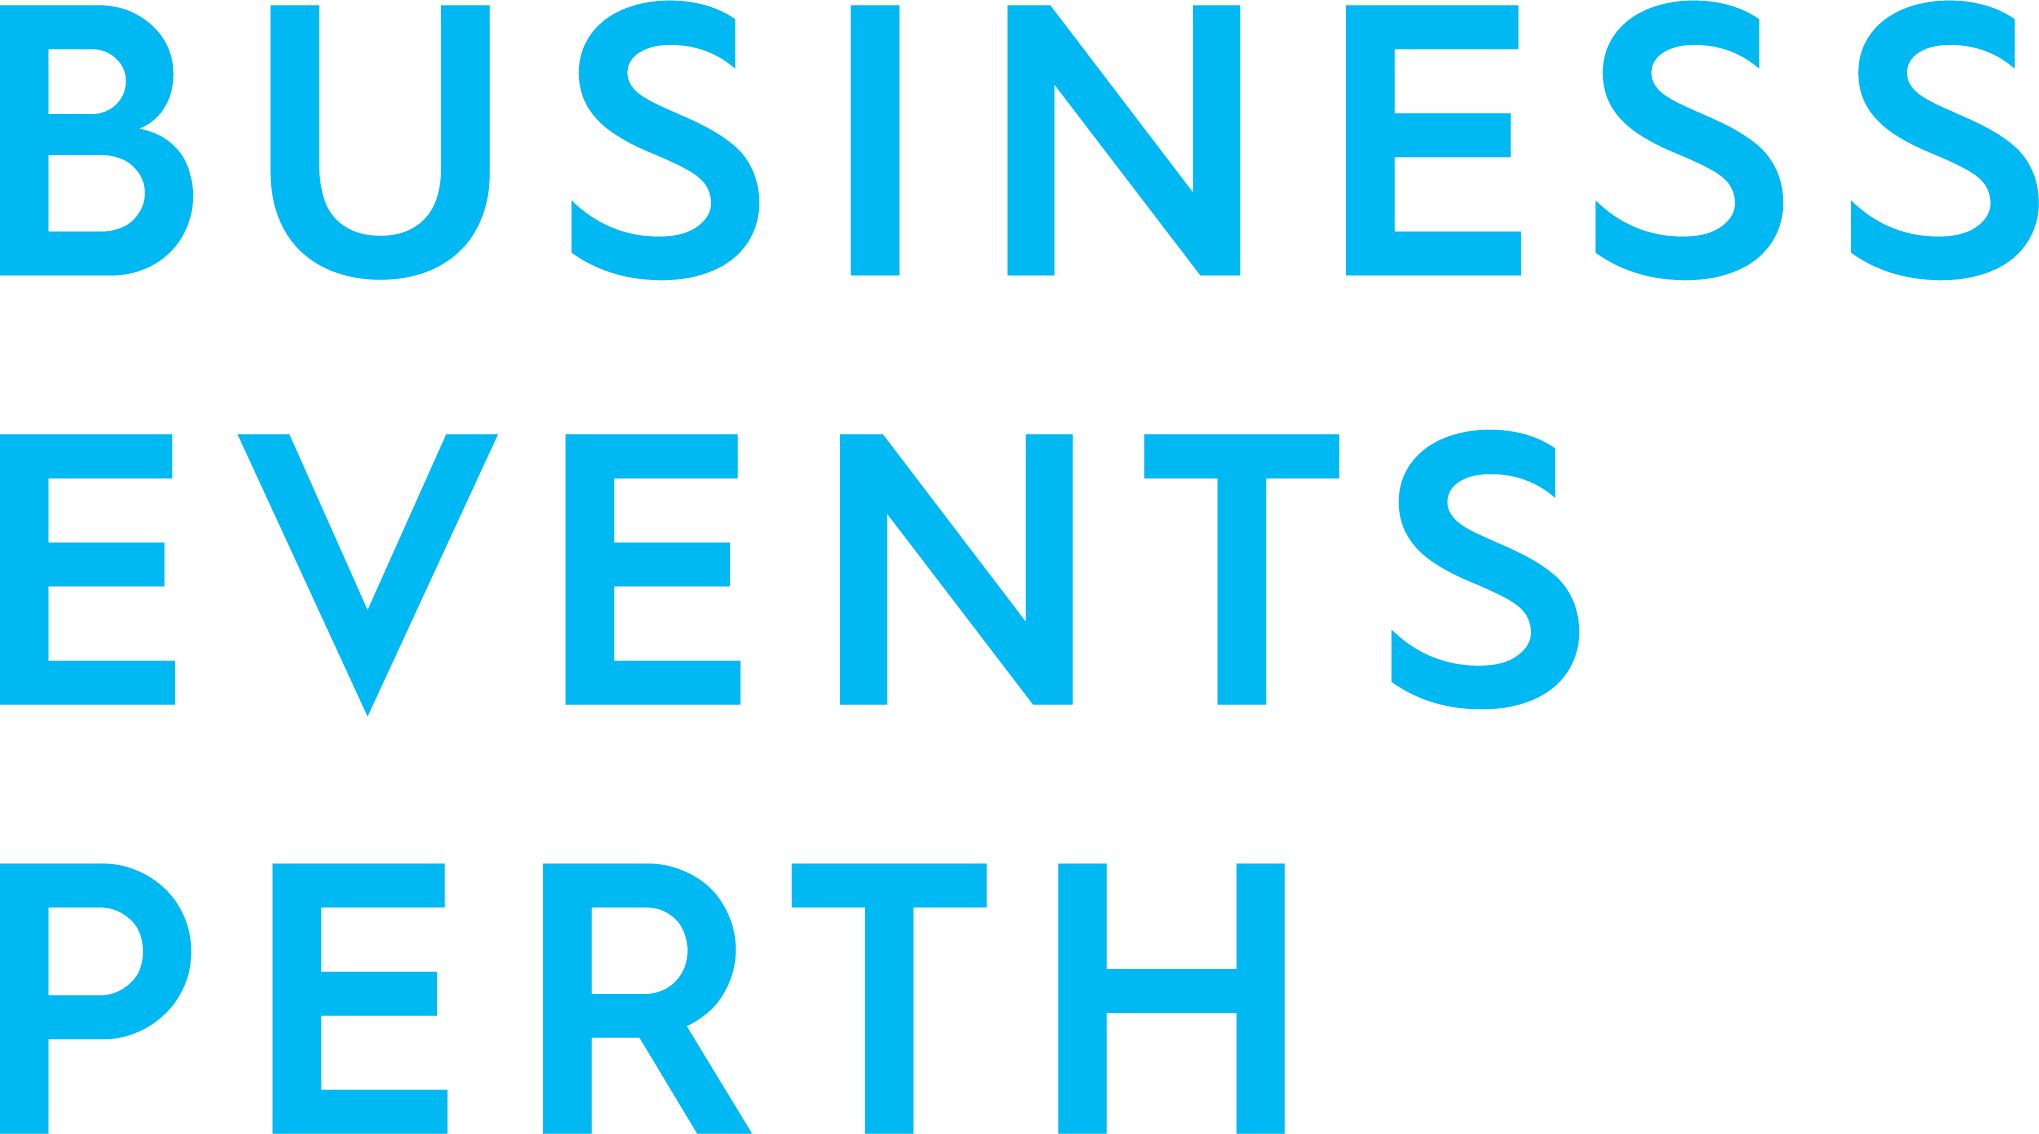 Business Events Perth